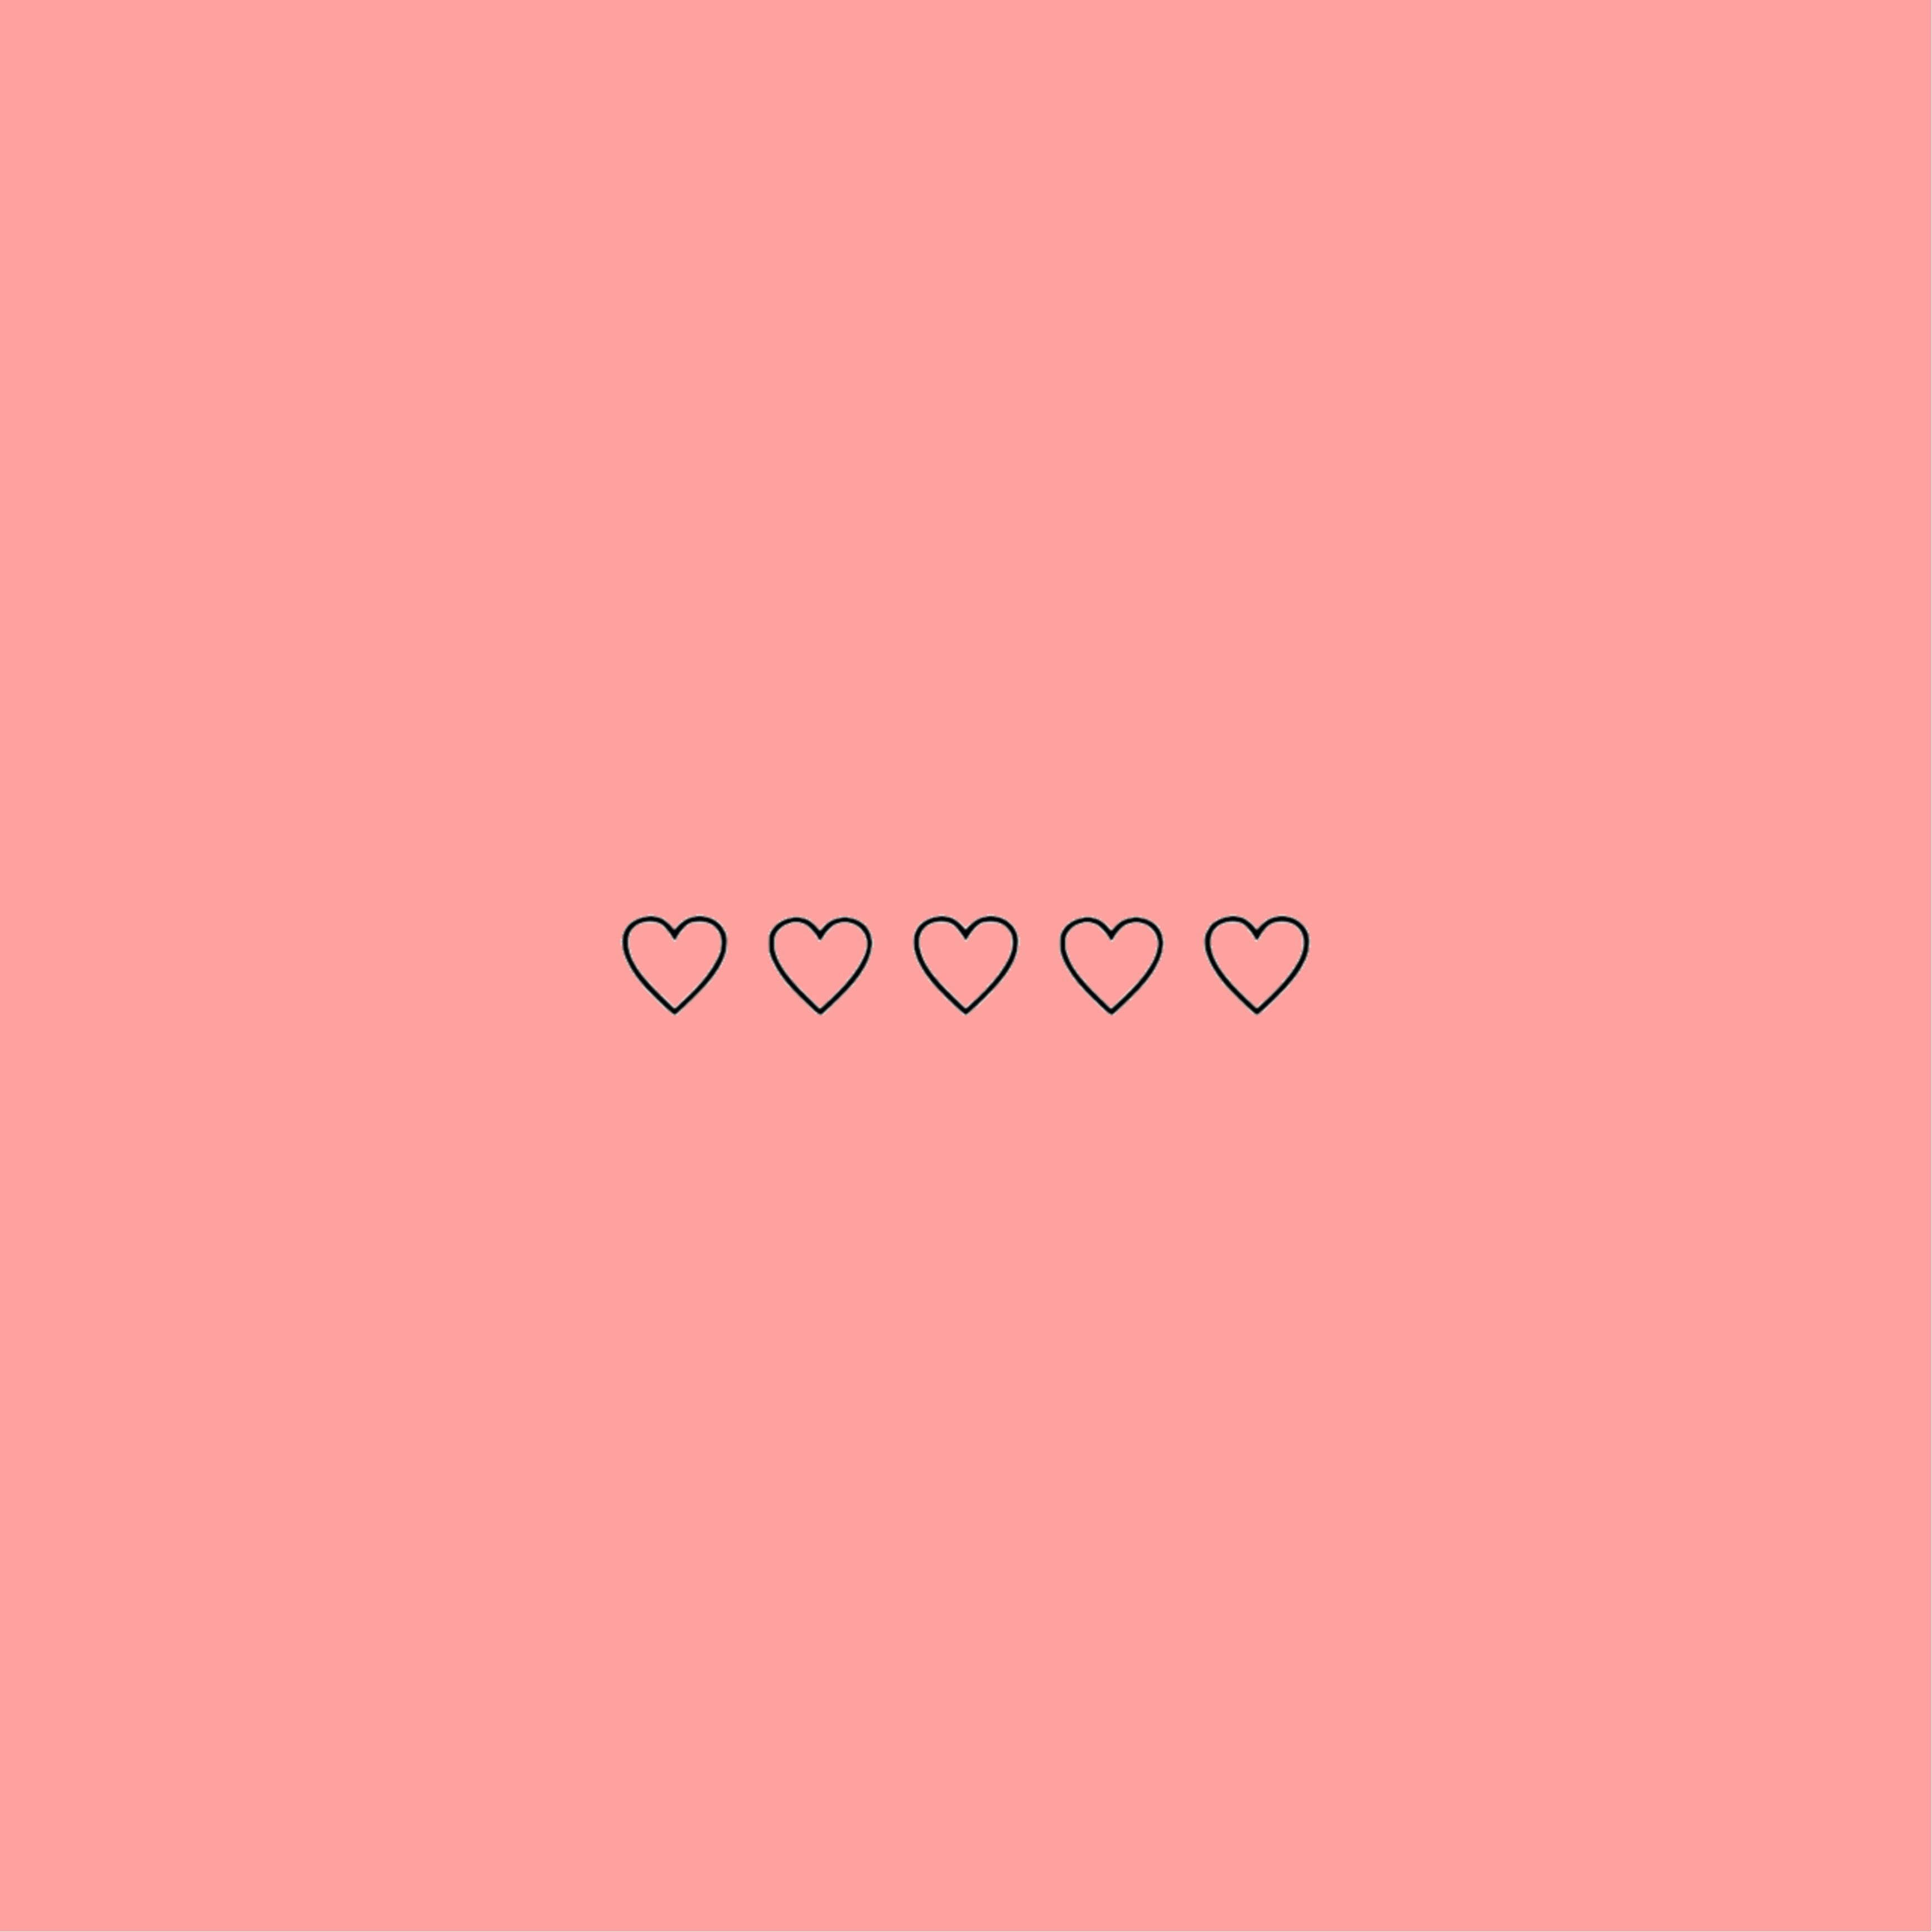 Cute Pink Aesthetic Black Hearts Picture